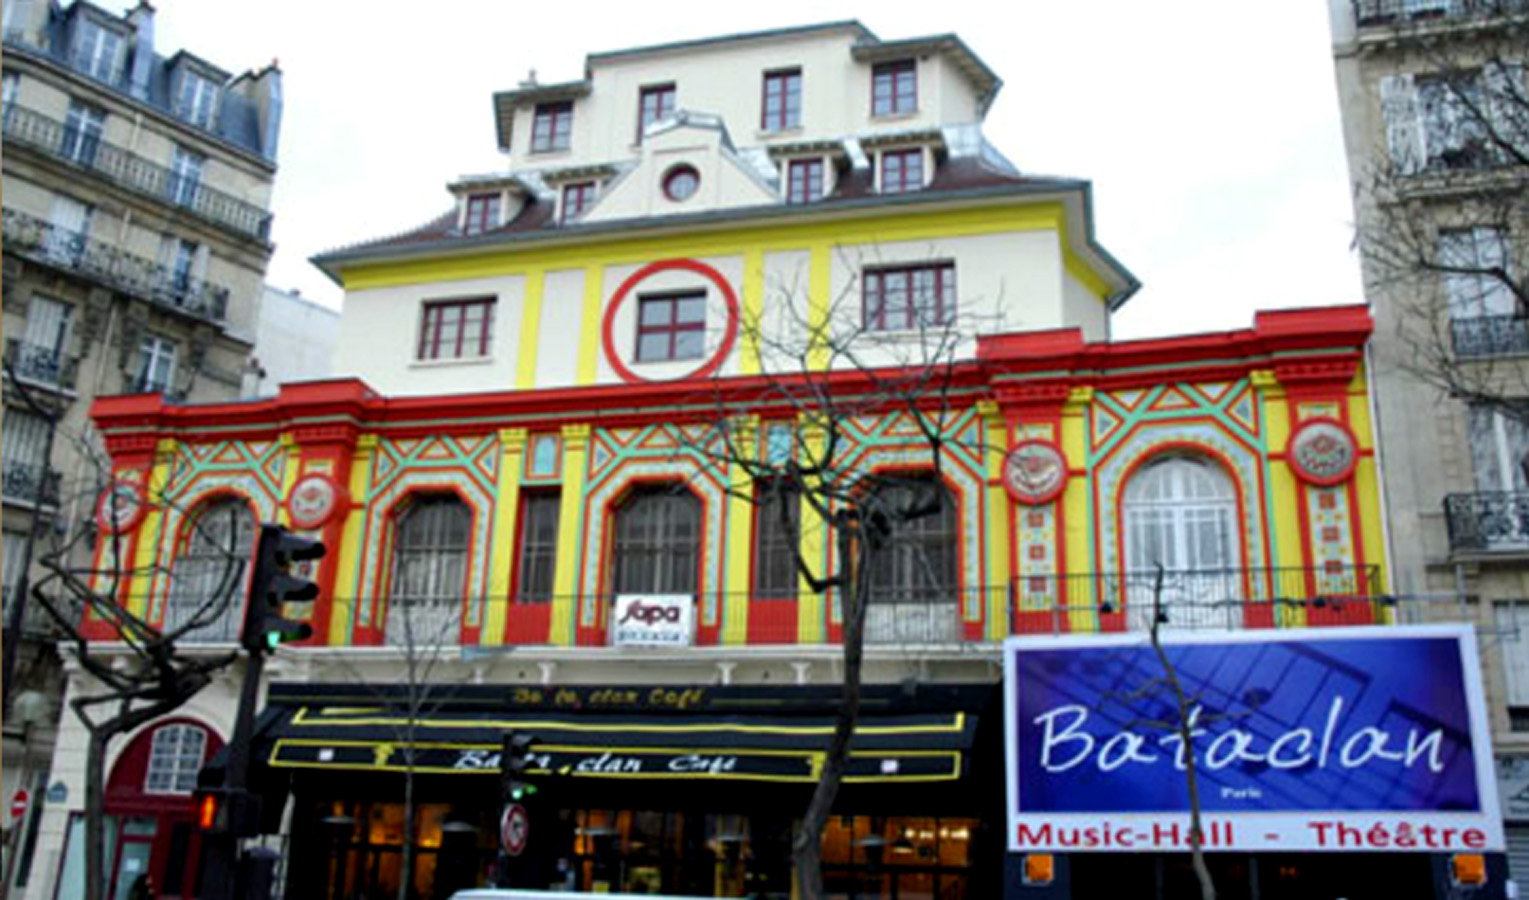 Bataclan, the concert hall in Paris where 89 of the 130 fatalities took place during the terrorist attacks of Nov. 13.